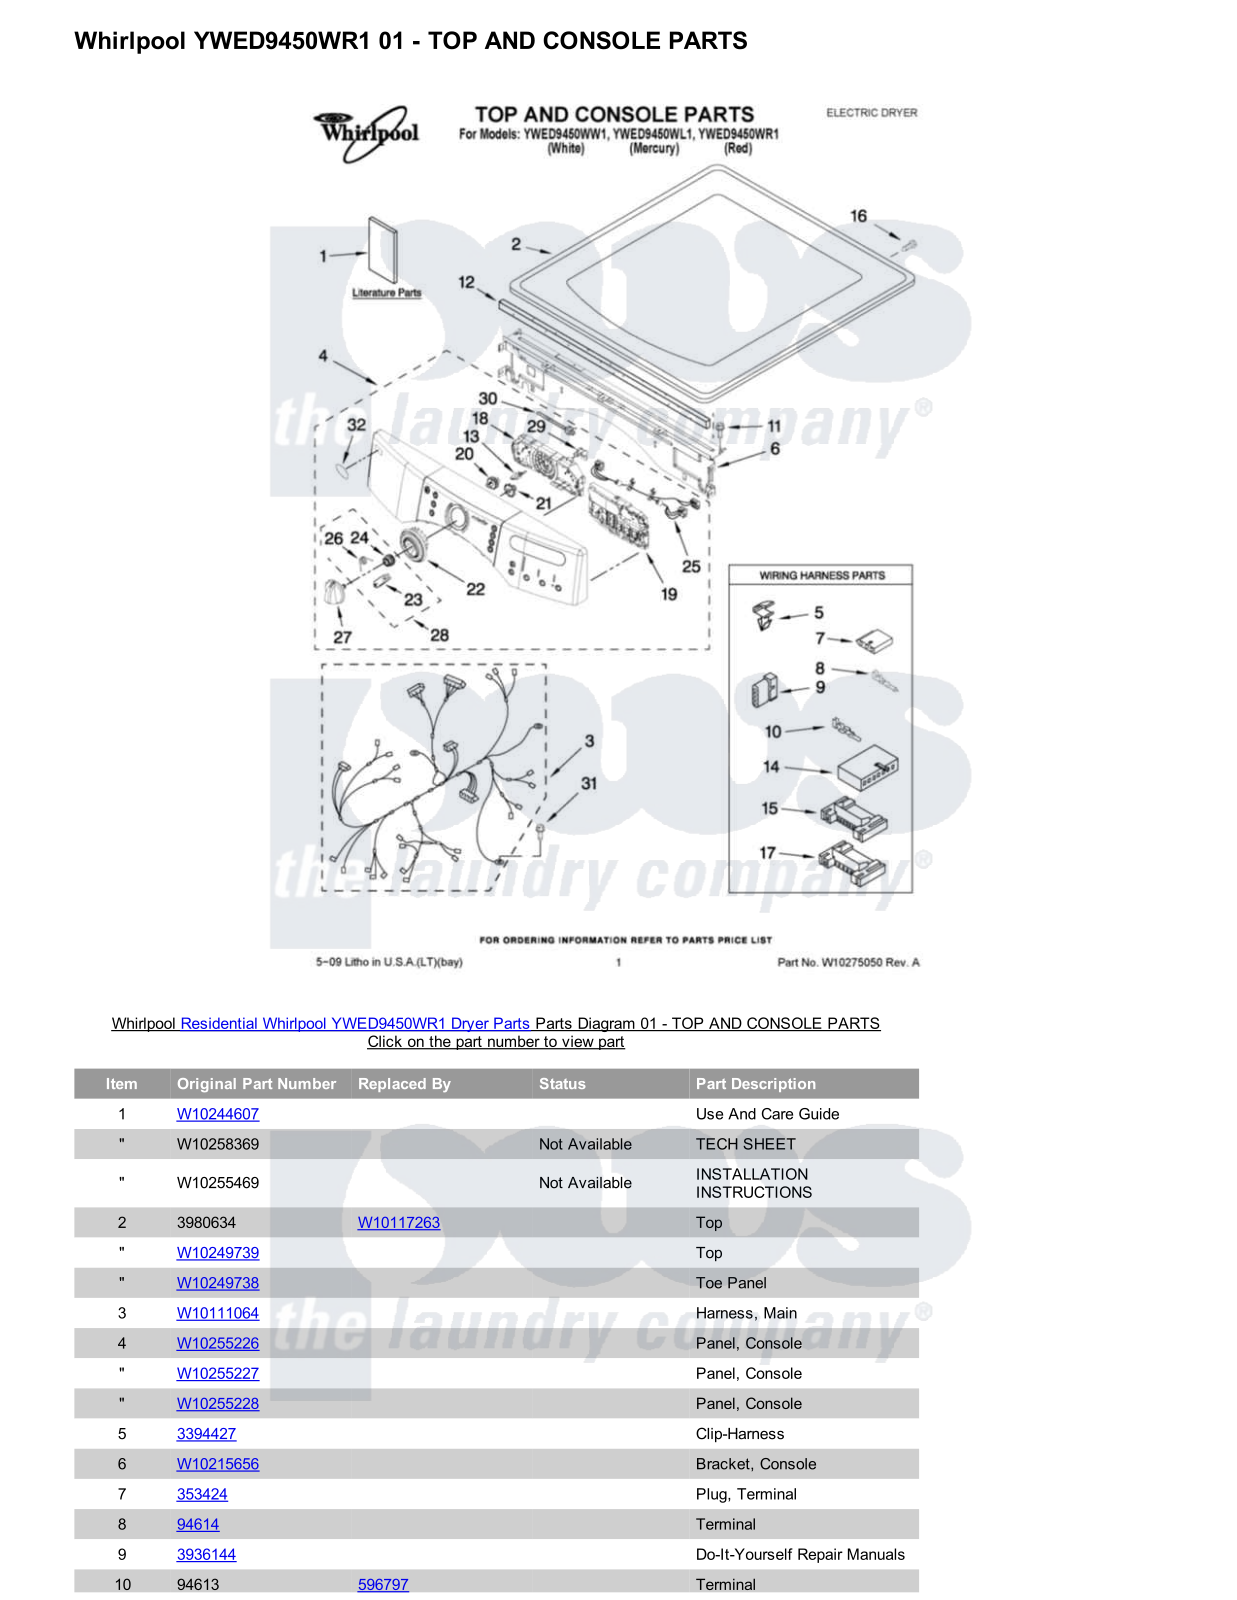 Whirlpool YWED9450WR1 Parts Diagram